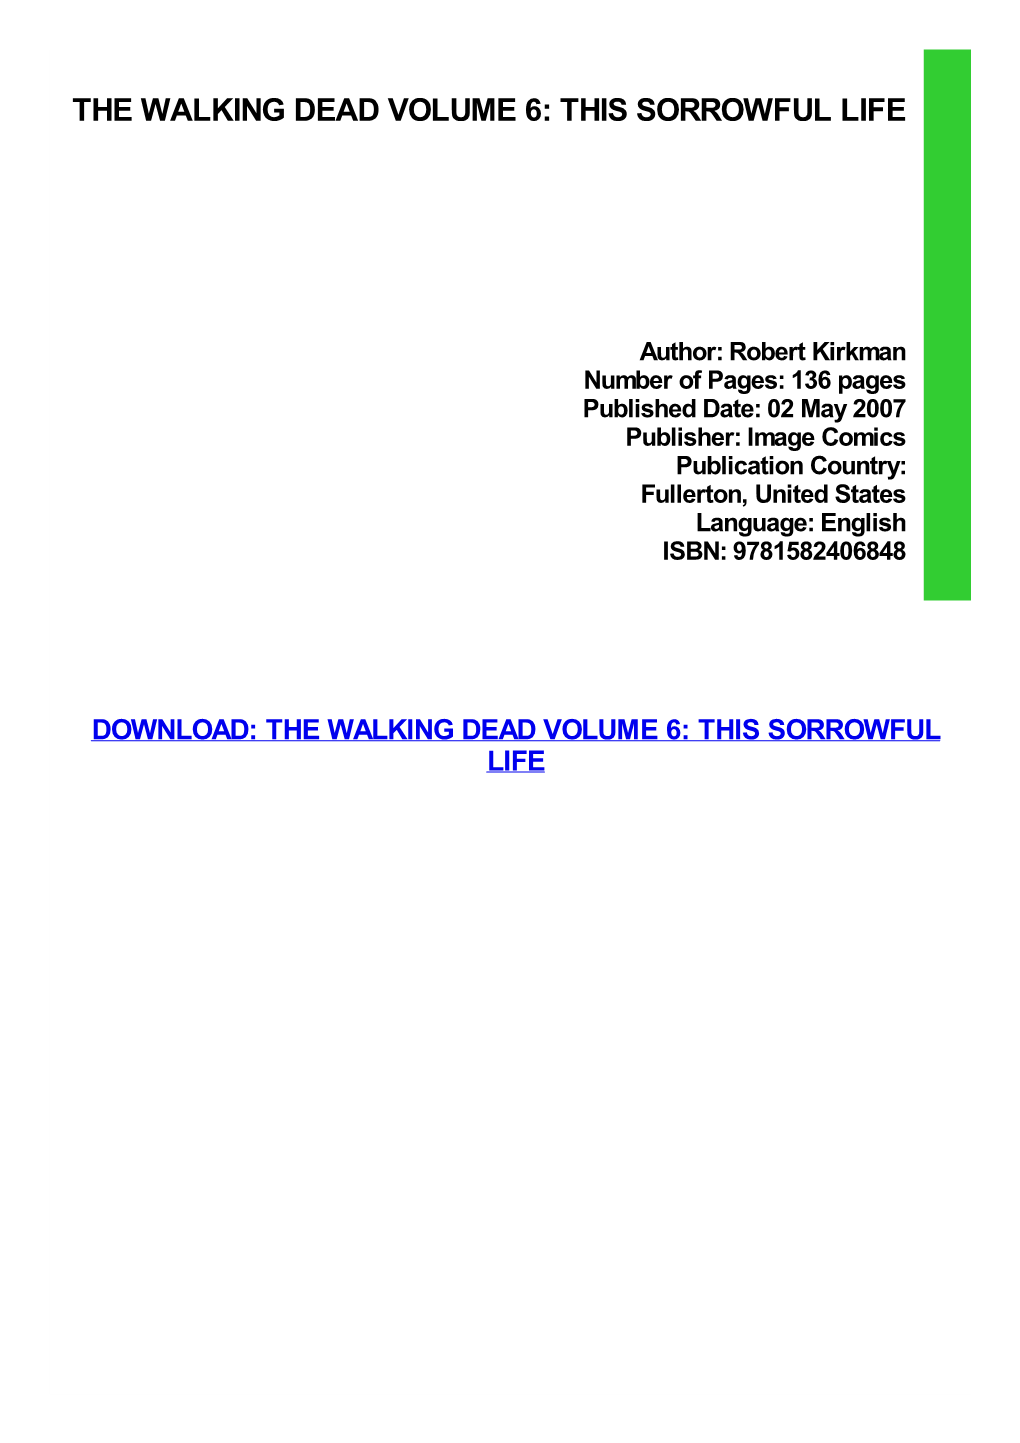 The Walking Dead Volume 6: This Sorrowful Life Download Free